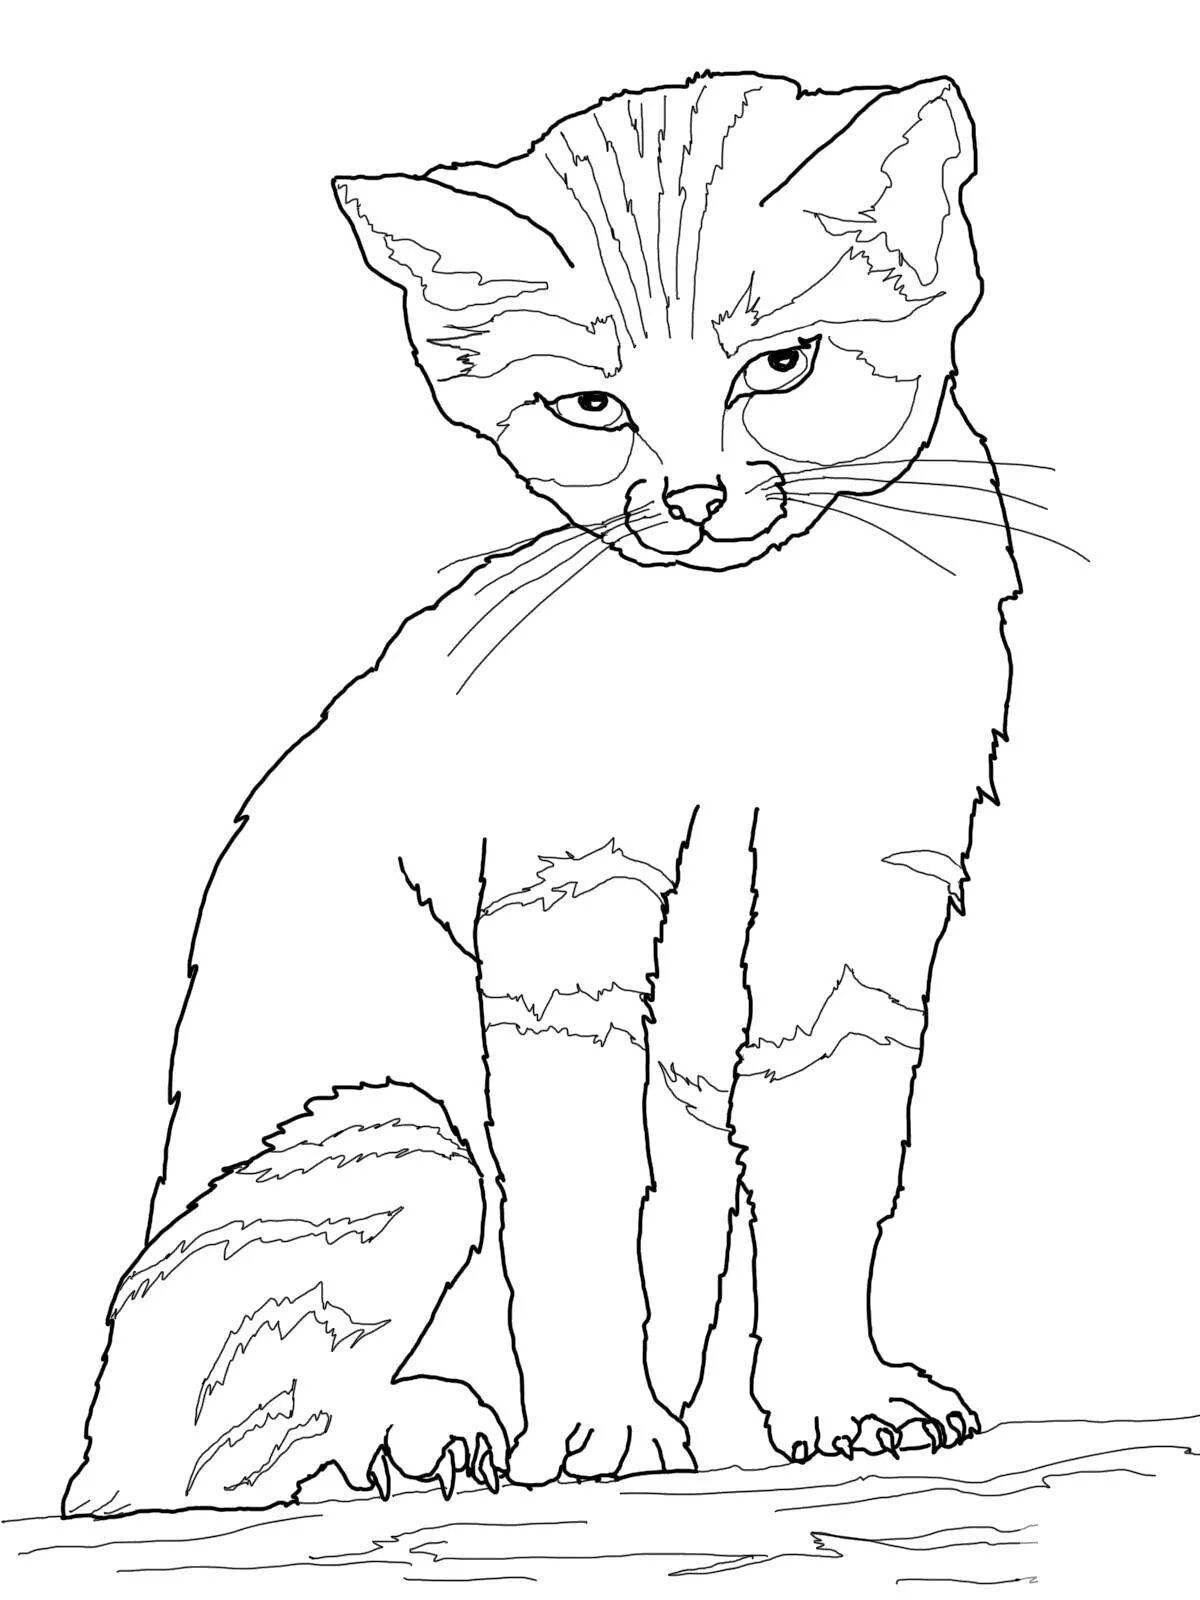 Fancy real cat coloring book